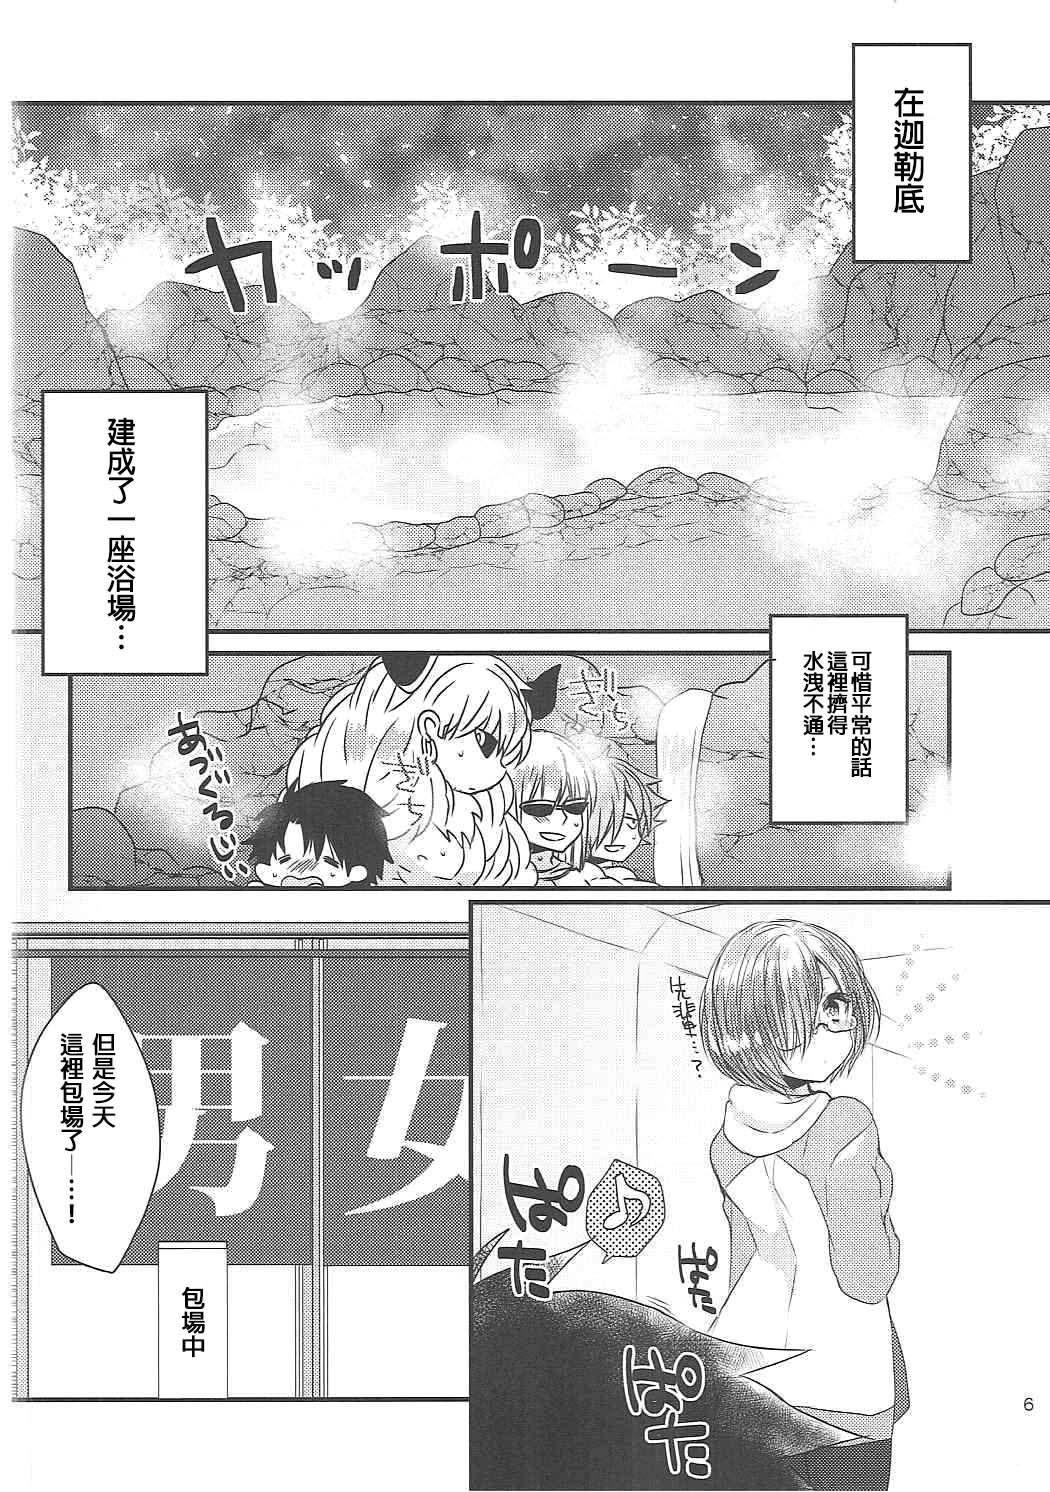 Rabo Kiyohime to Love Love Ofuro Time - Fate grand order Outdoor - Page 6